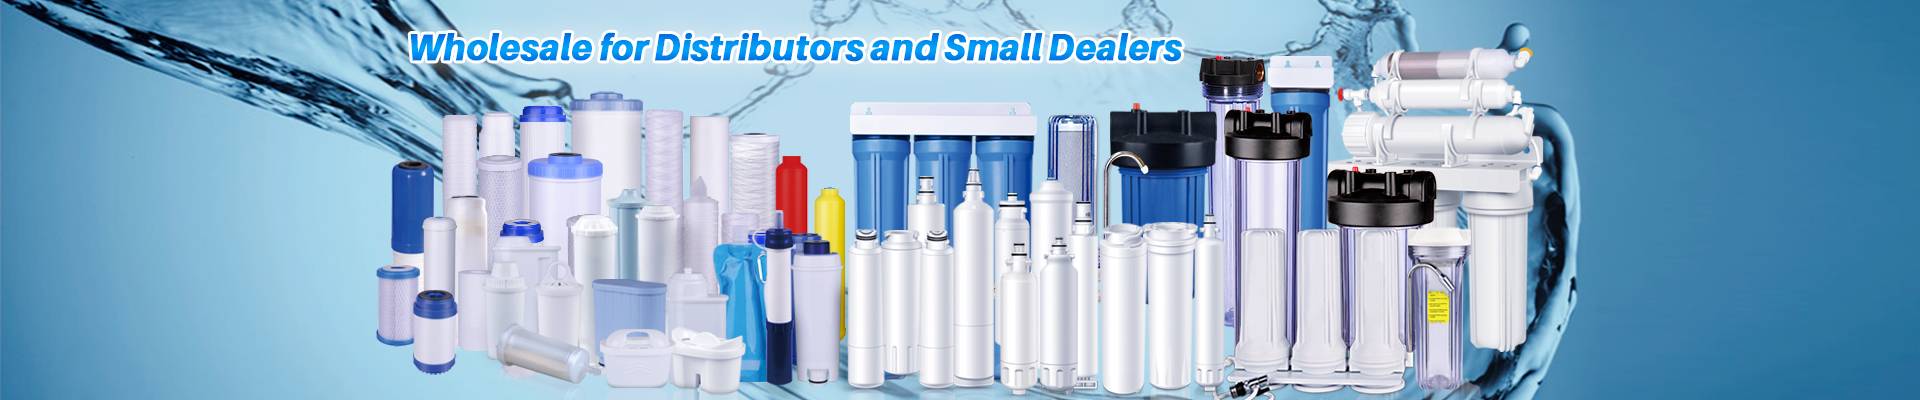 wholesale water filters manufacturer supplier